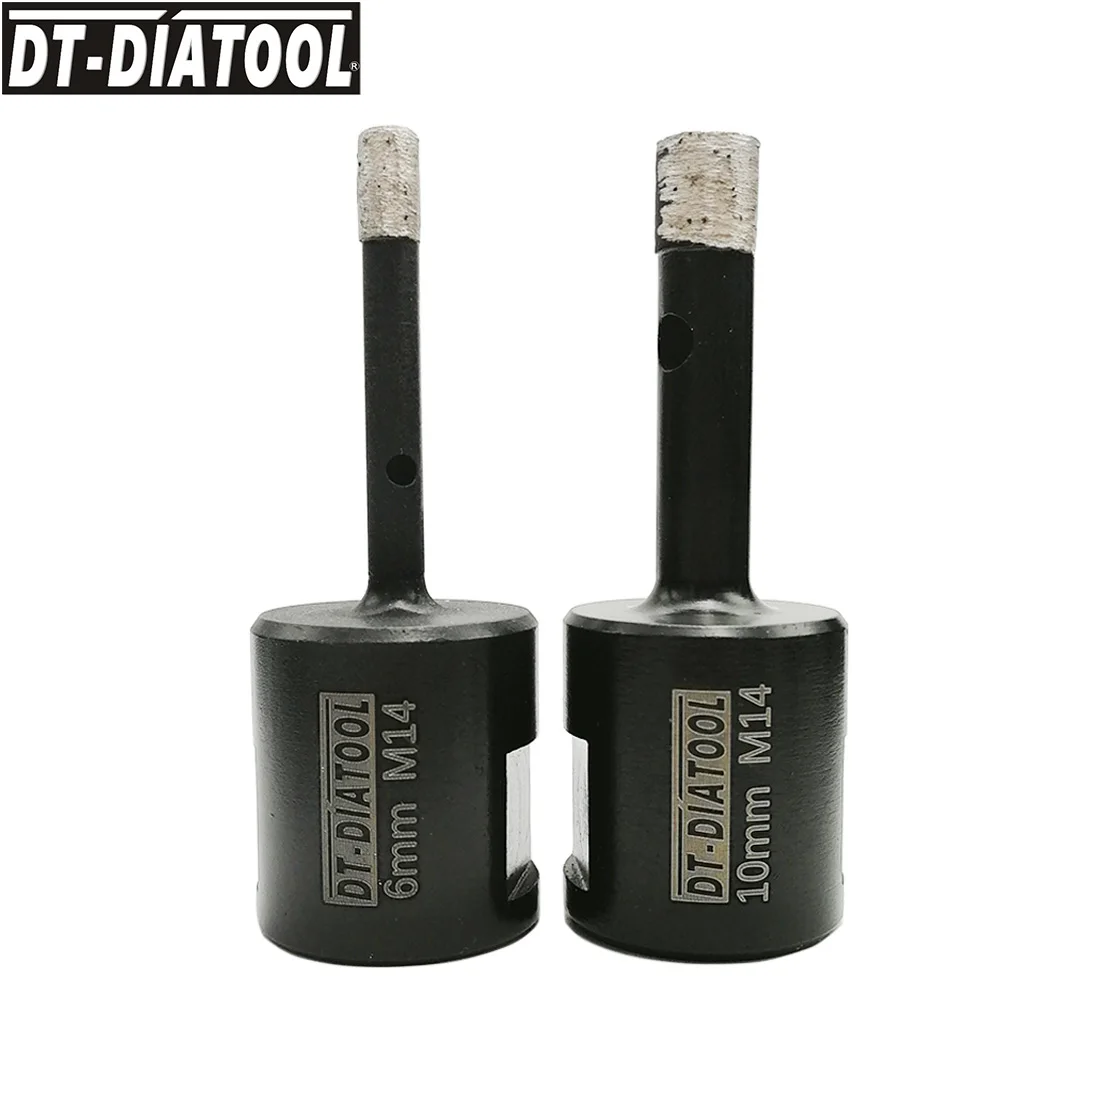 DT-DIATOOL 2pcs/Set 6+10mm M14 Diamond Wet Welded Solid Segments Drilling Core Bits Drill Bits Hole Saw For Granite Stone Marble dt diatool 2pcs 5 8 11thread dia20mm laser welded crown segments diamond dry drilling core bits hard granite marble nature stone